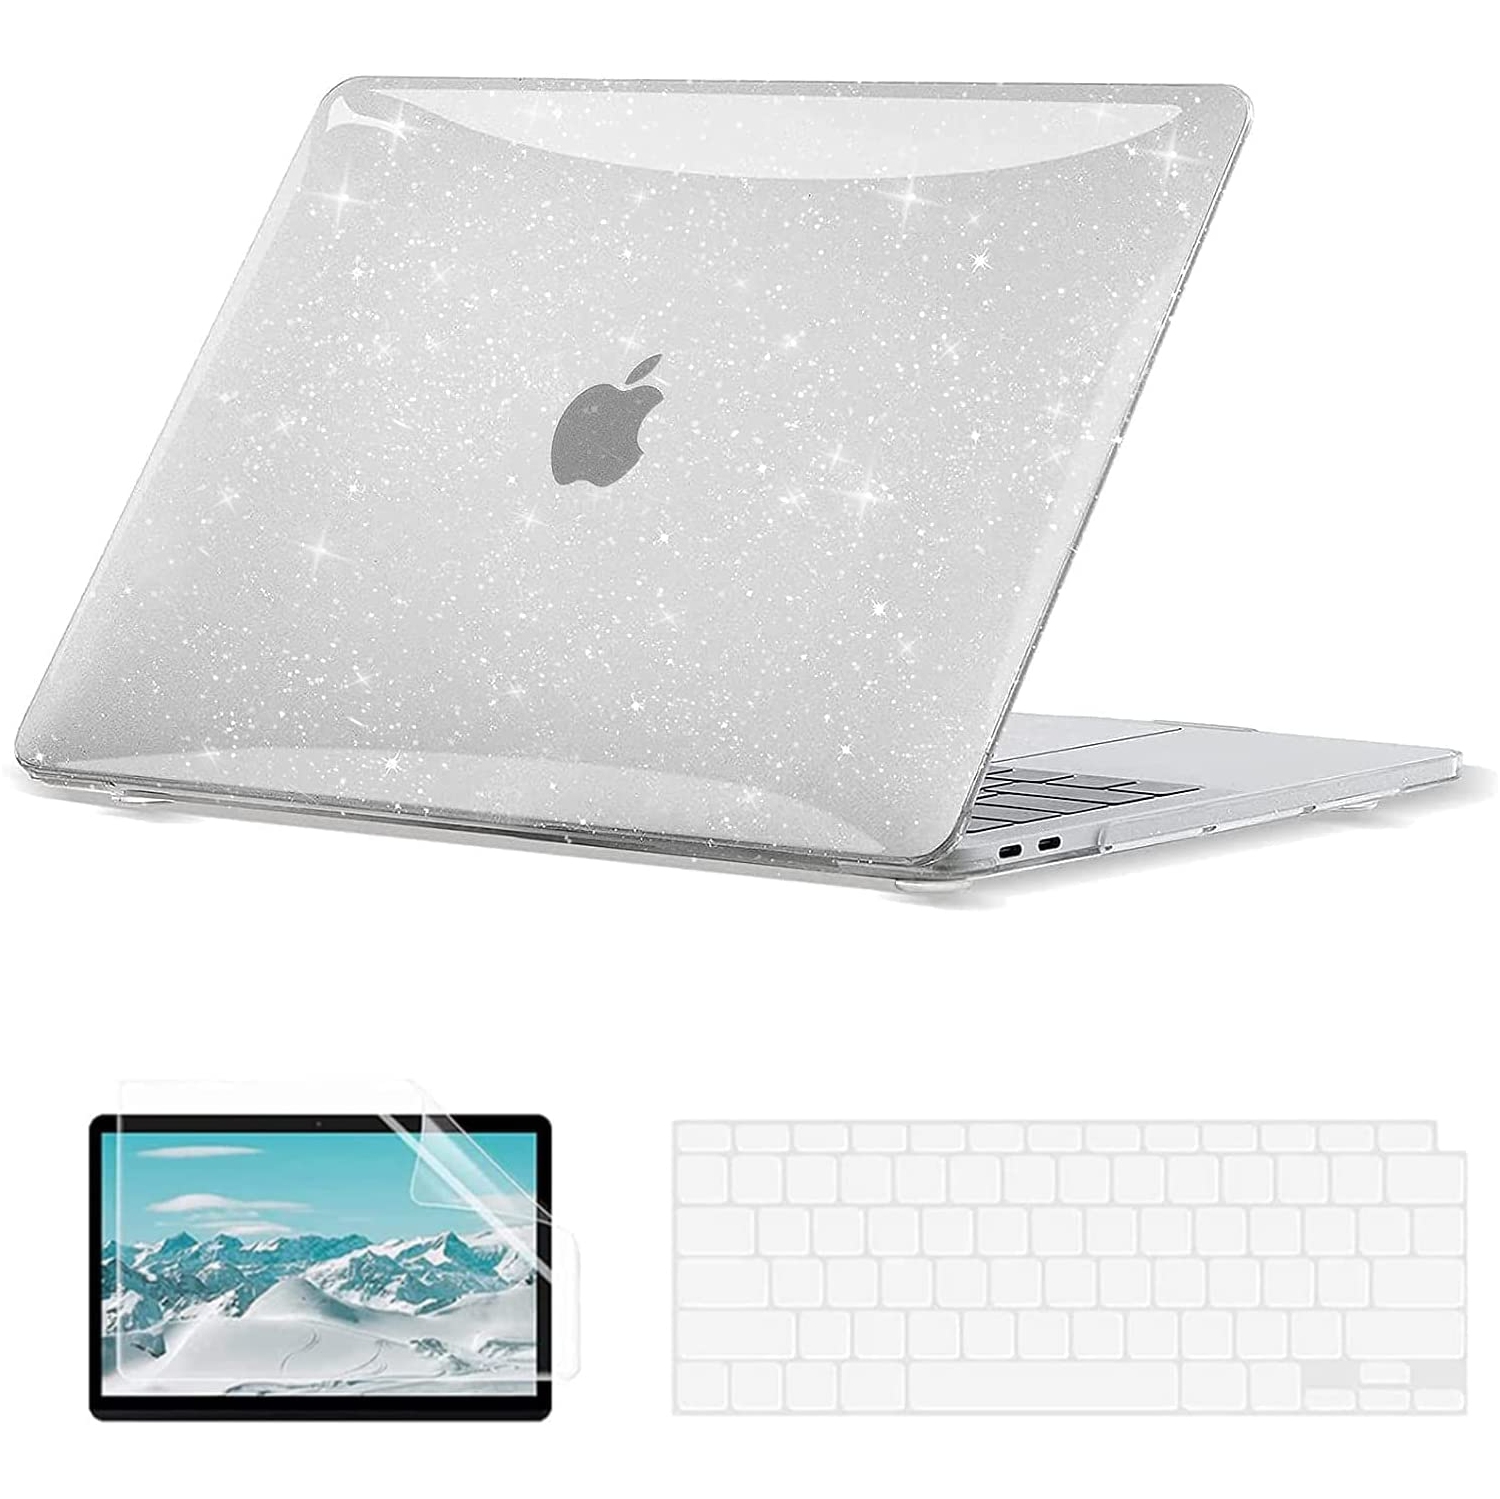 Compatible with MacBook Air 13 inch Case 2022-2018 M1 A2337 A2179 A1932 with Retina Display Touch ID, Sparkly Clear MacBook Air Case + 2 TPU Keyboard Cover + Screen Protecto